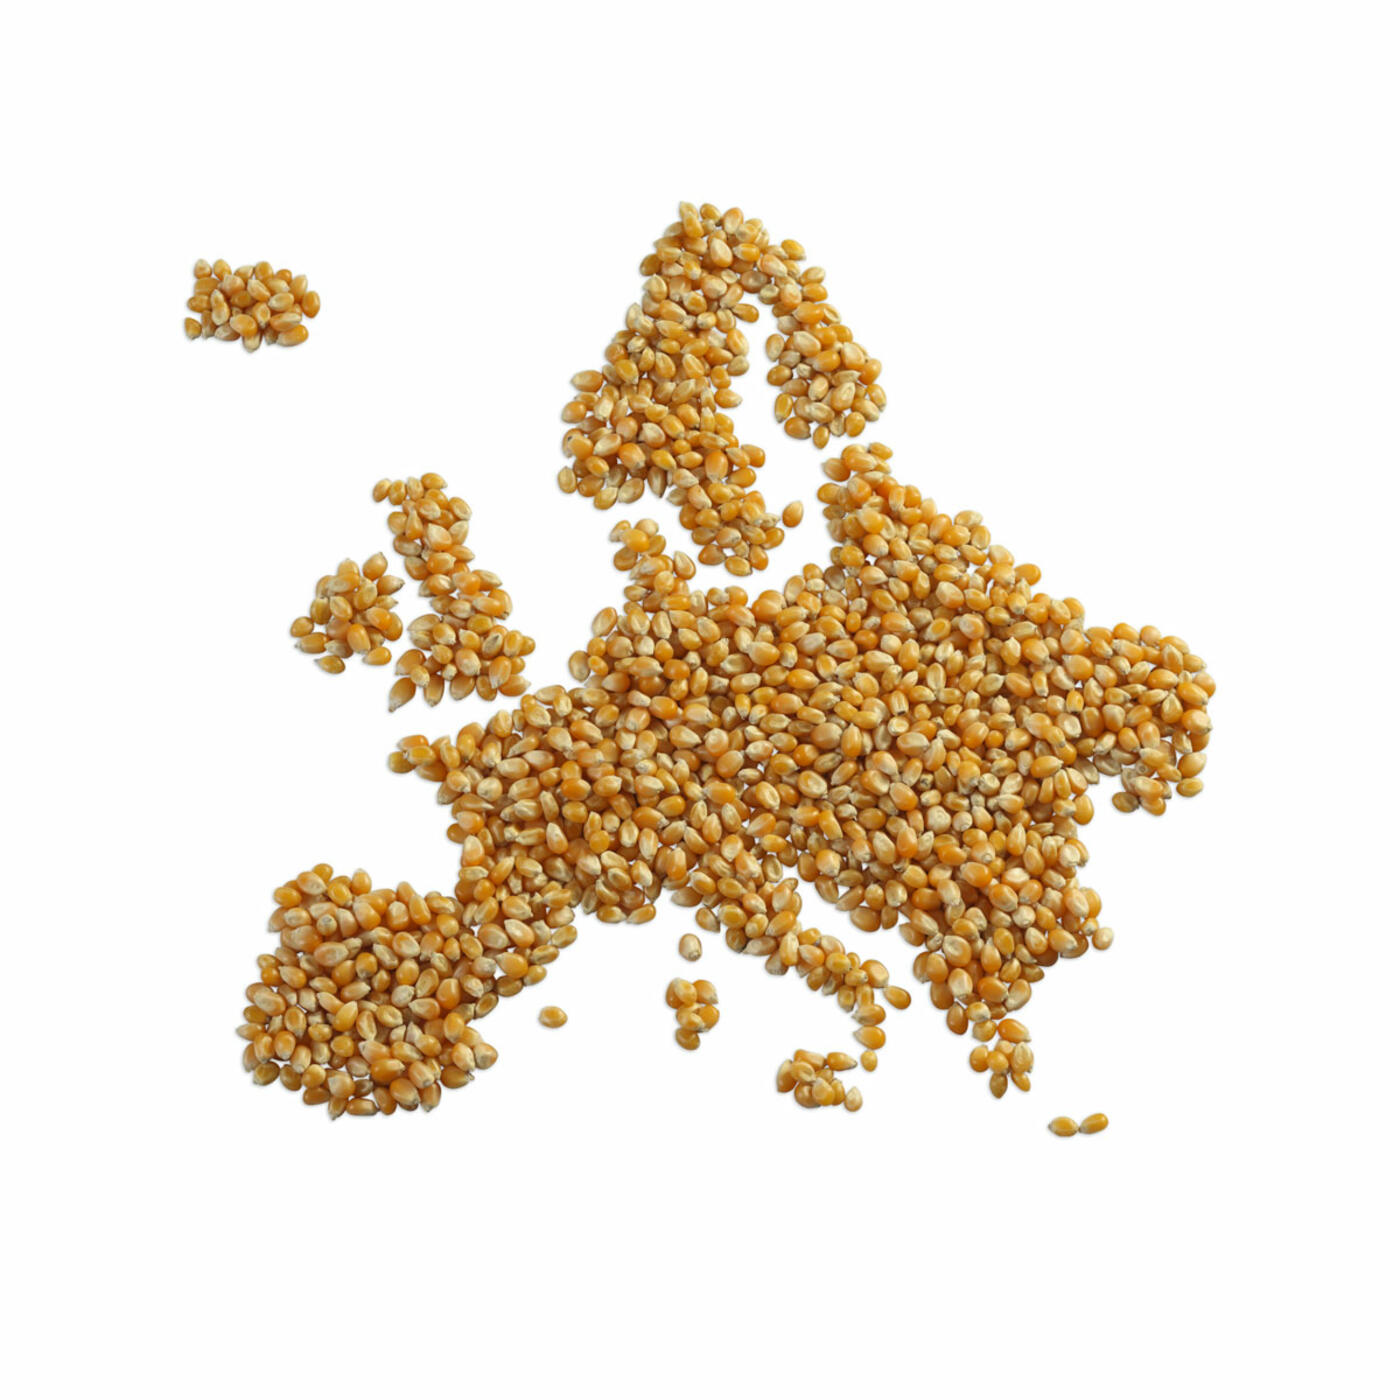 Istock-Image-of-map-made-of-corn-1326189621_4357x5309_8